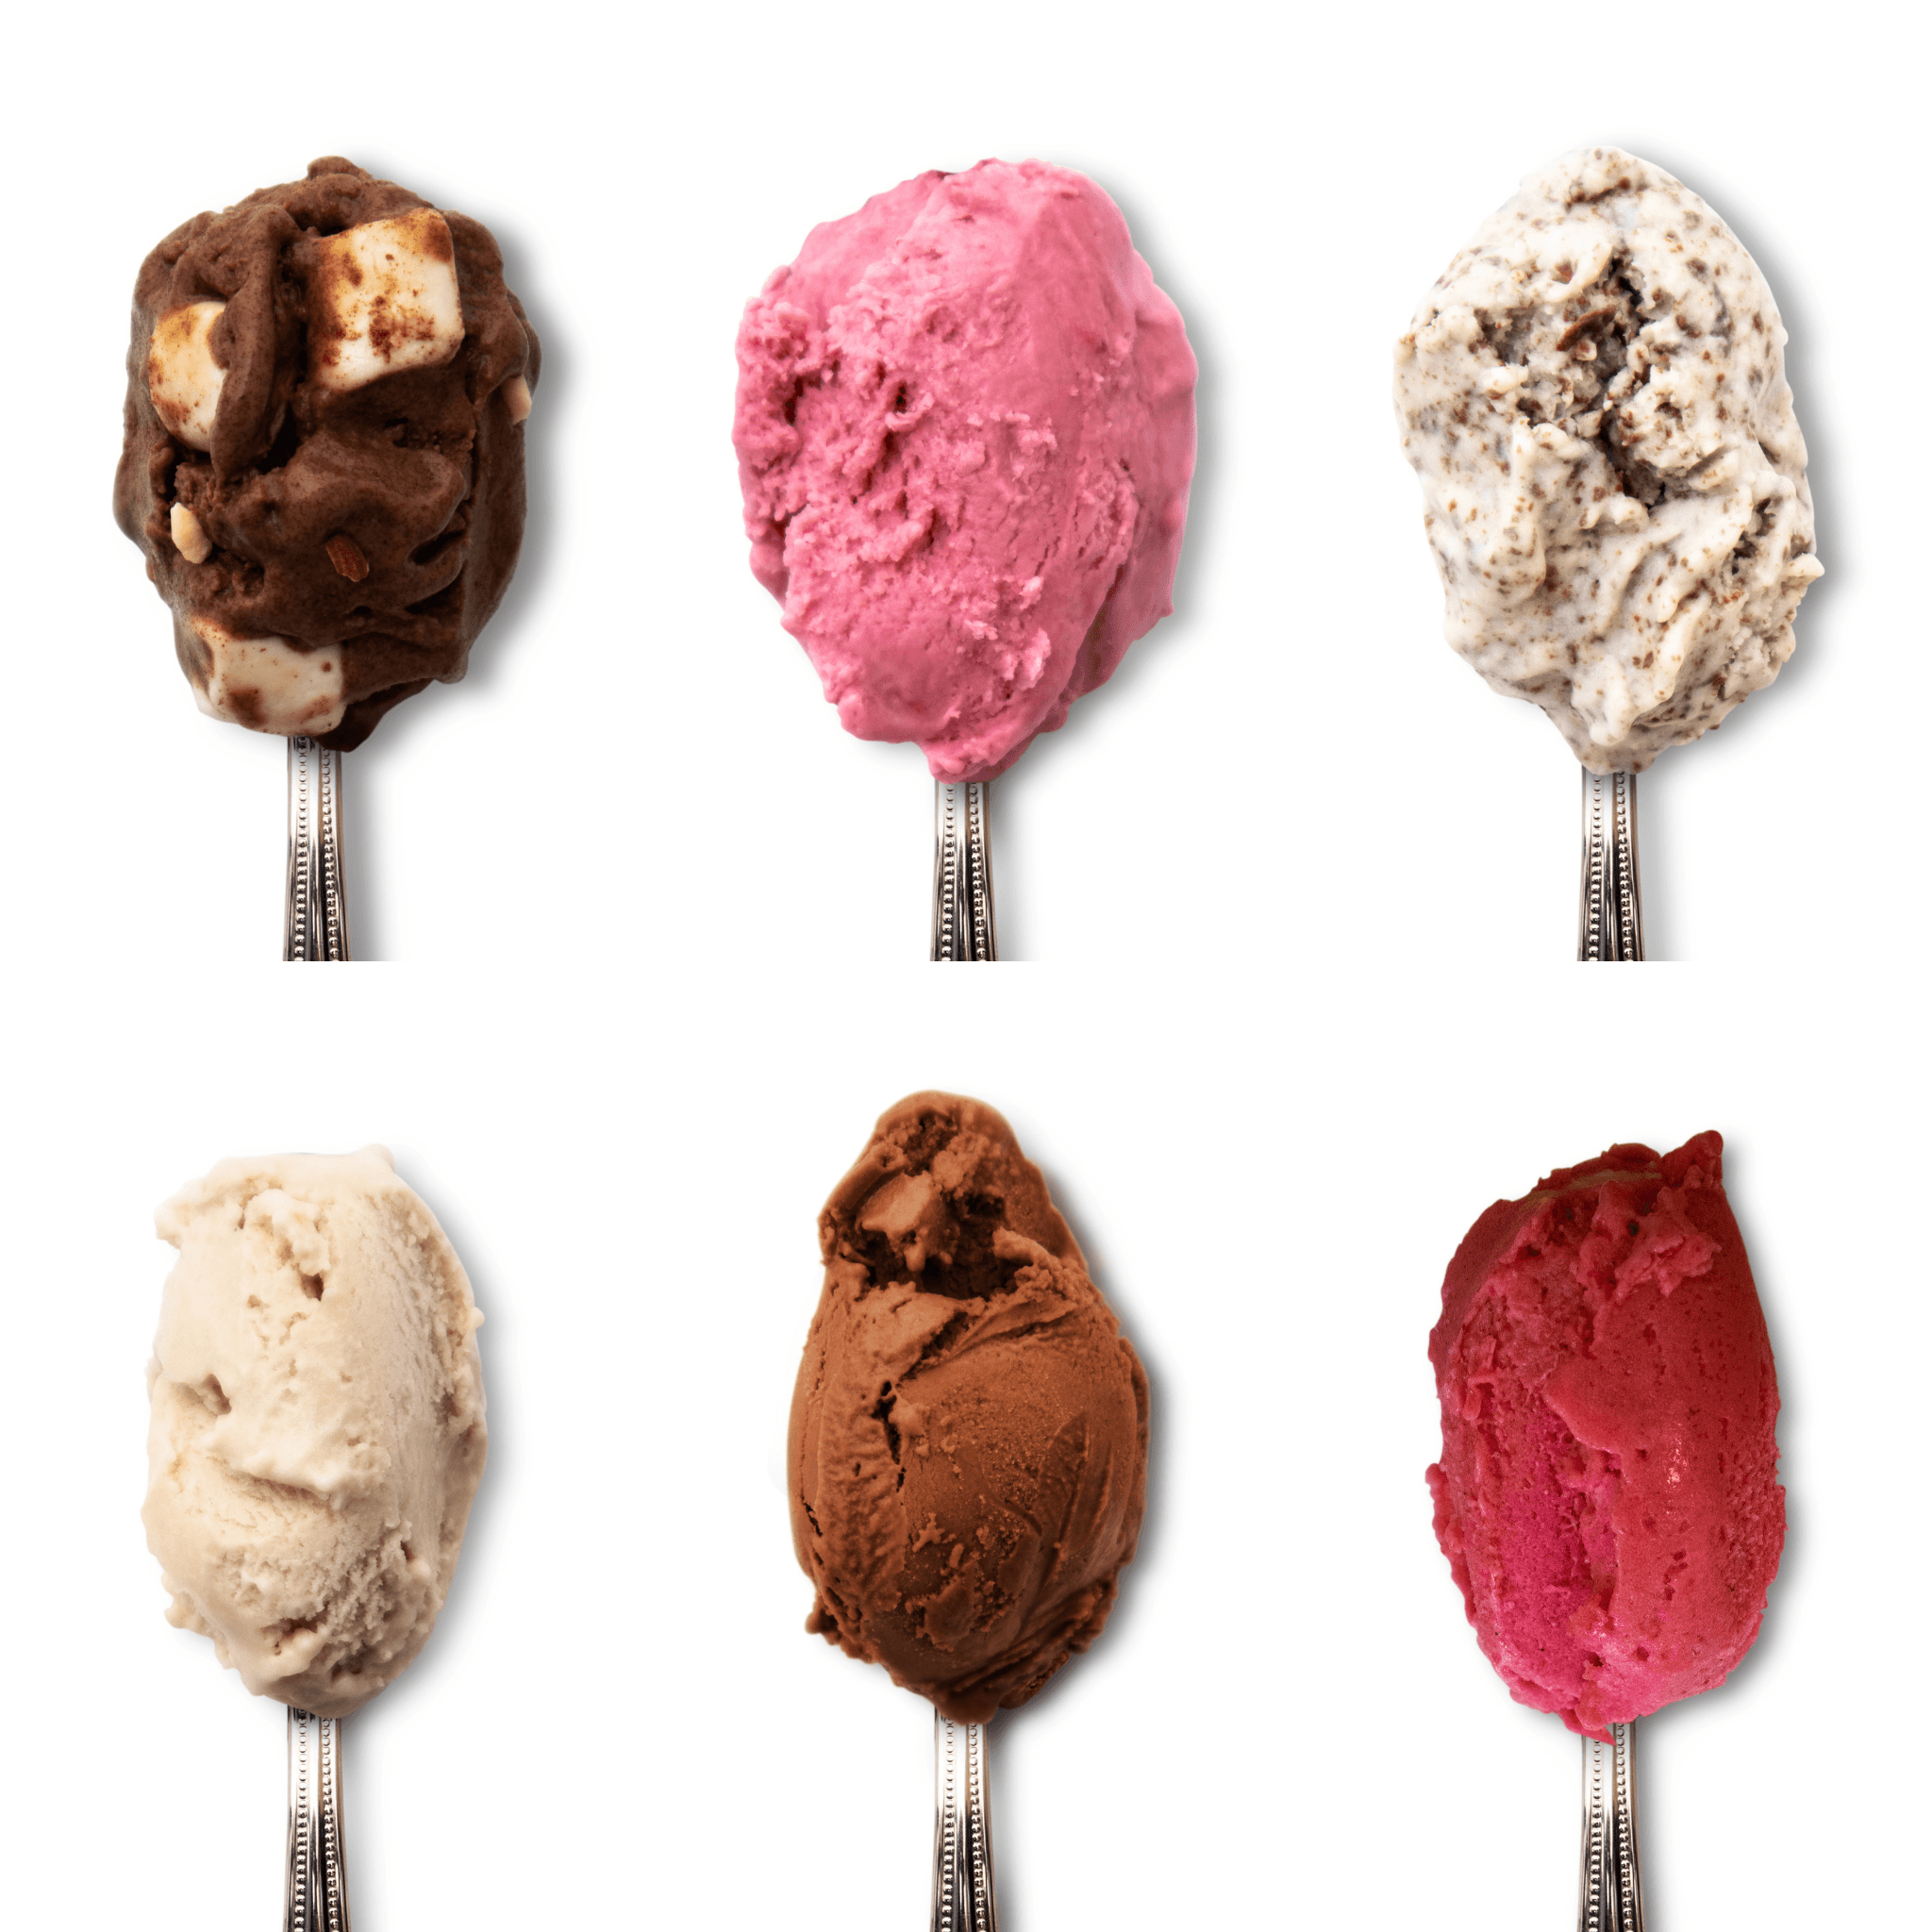 Create Your Own Ice Cream 6 Pack - 8oz each (Local San Antonio Only)